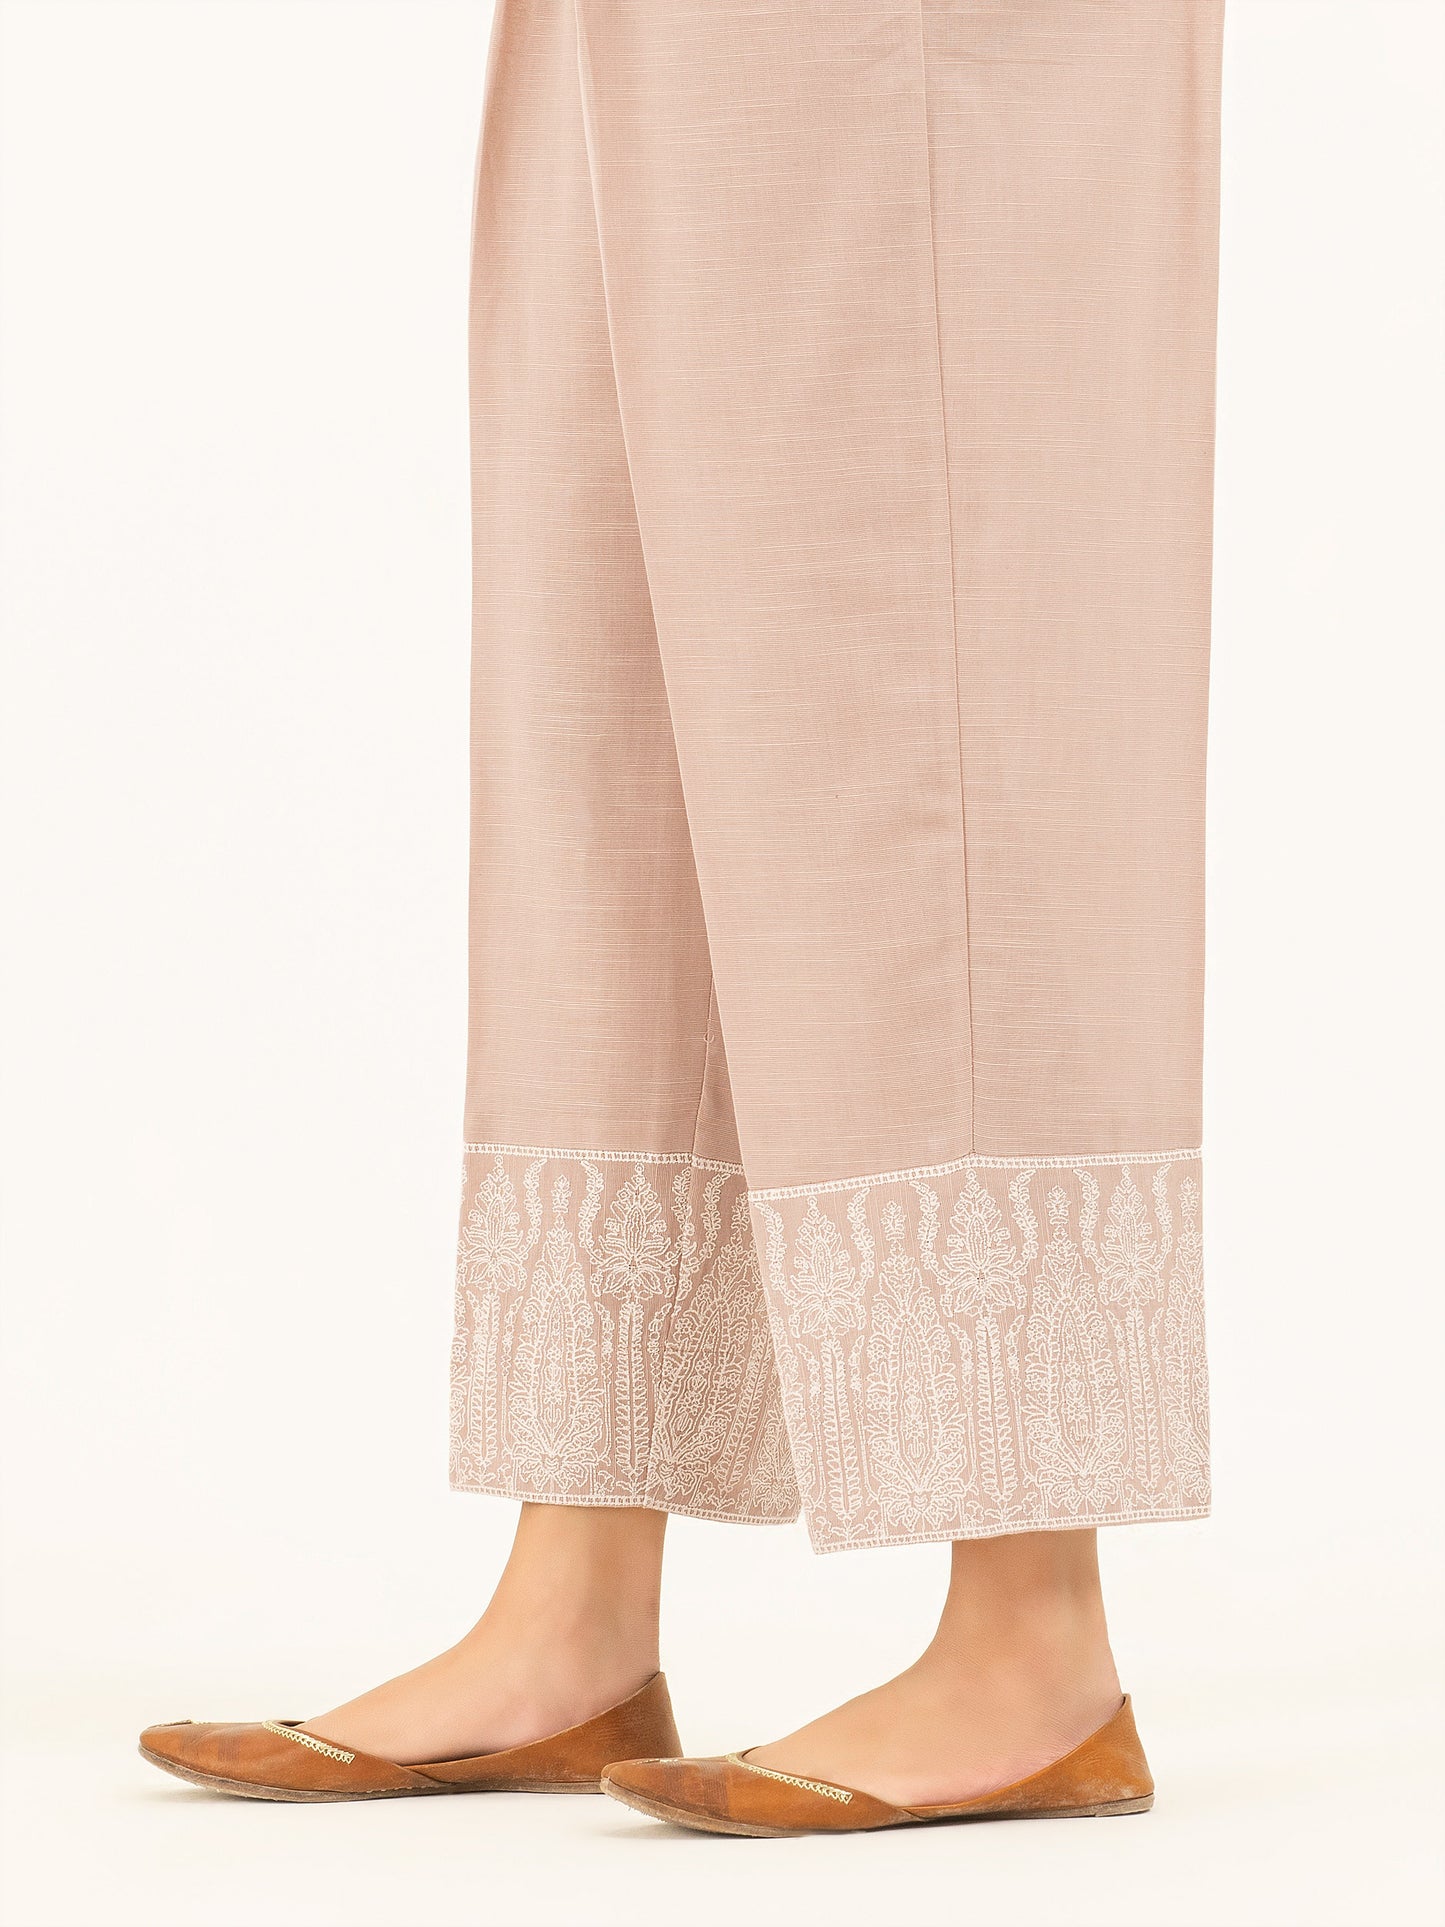 Embroidered Khaddar Trousers(Pret)